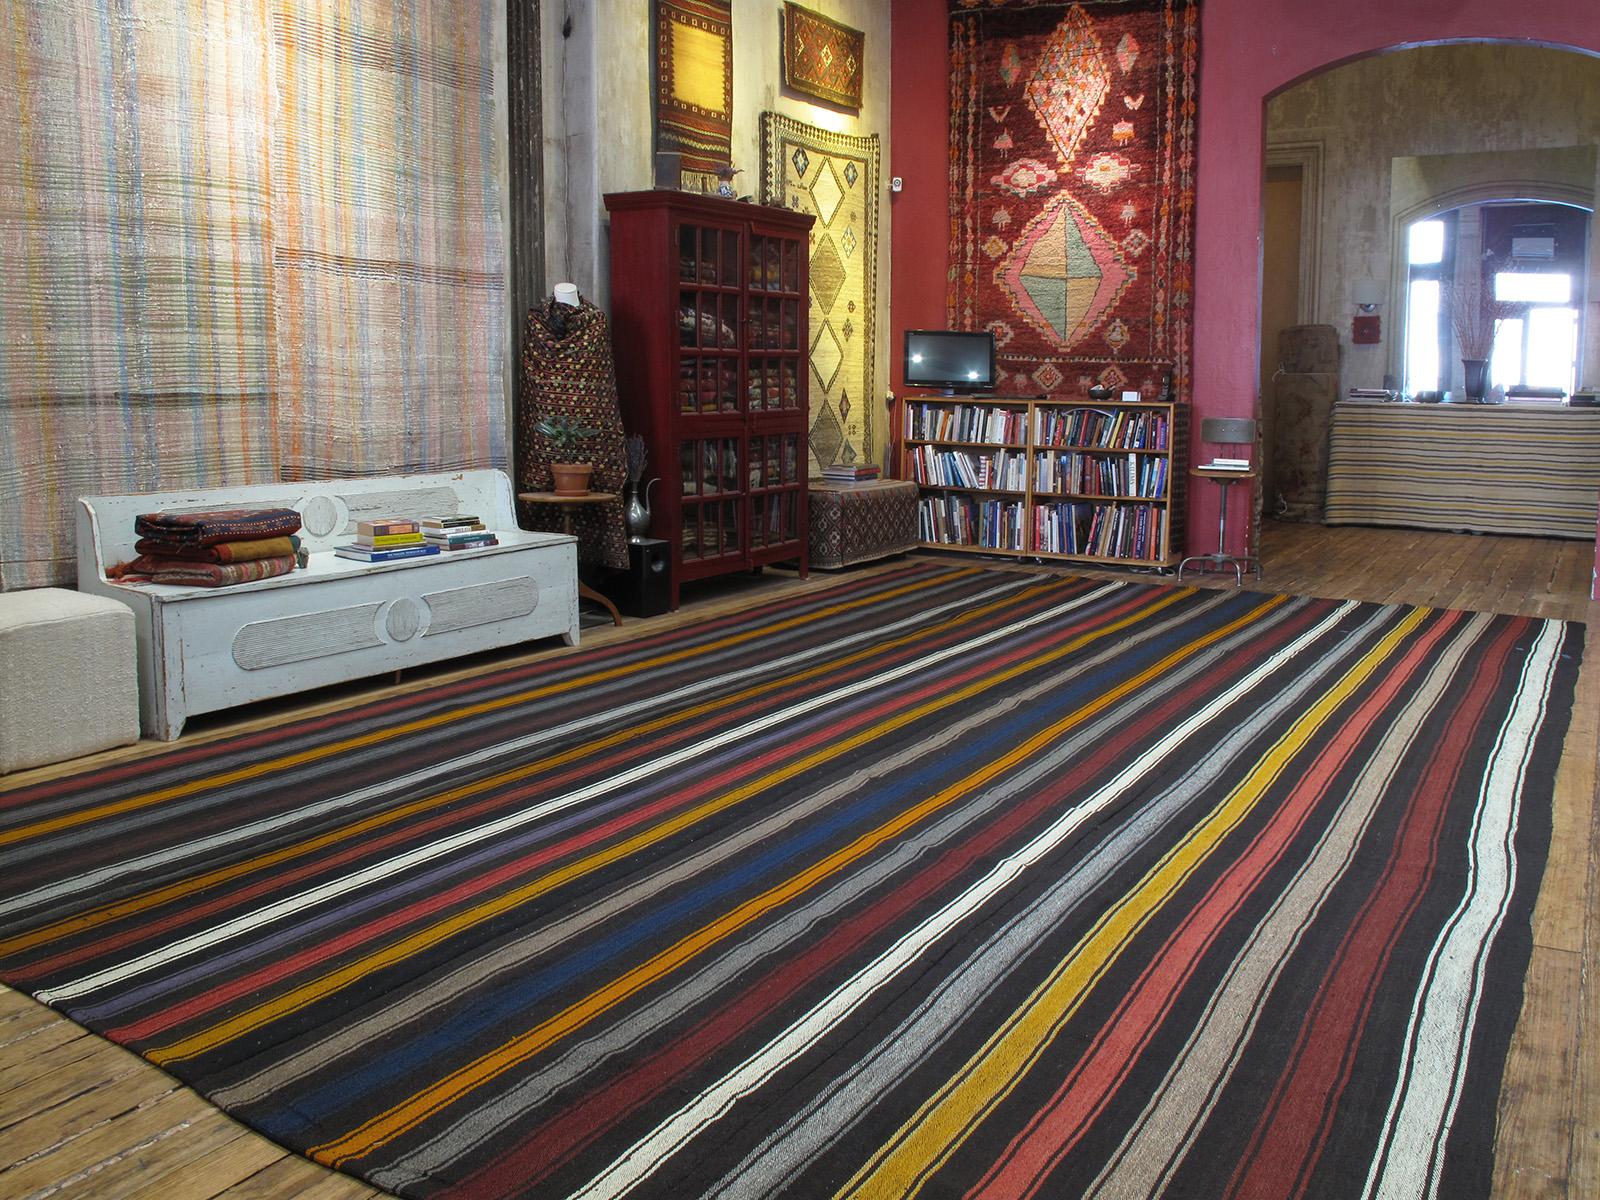 A very large tribal flat-weave from Southeastern Turkey, woven with wool and goat hair in multicolored vertical bands. A kilim like this would have been used as a utilitarian, everyday floor cover in the weaver's household. Despite its humble